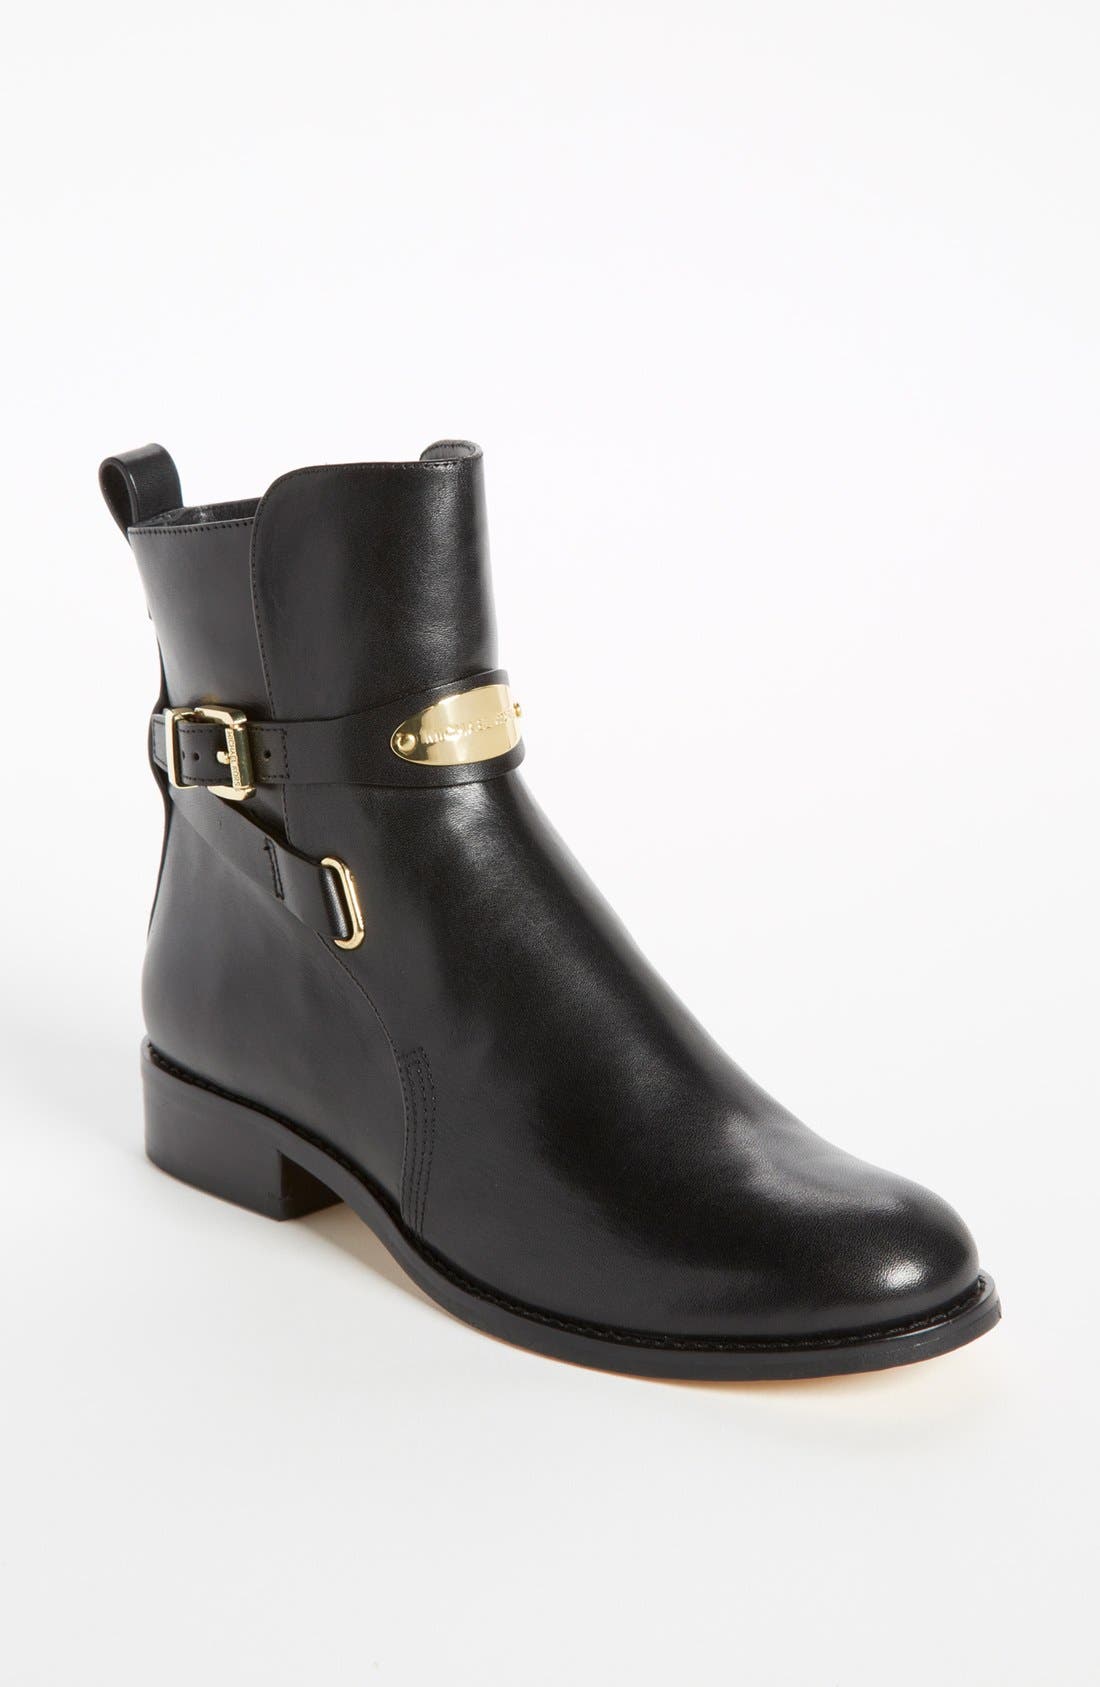 michael kors arley ankle boots